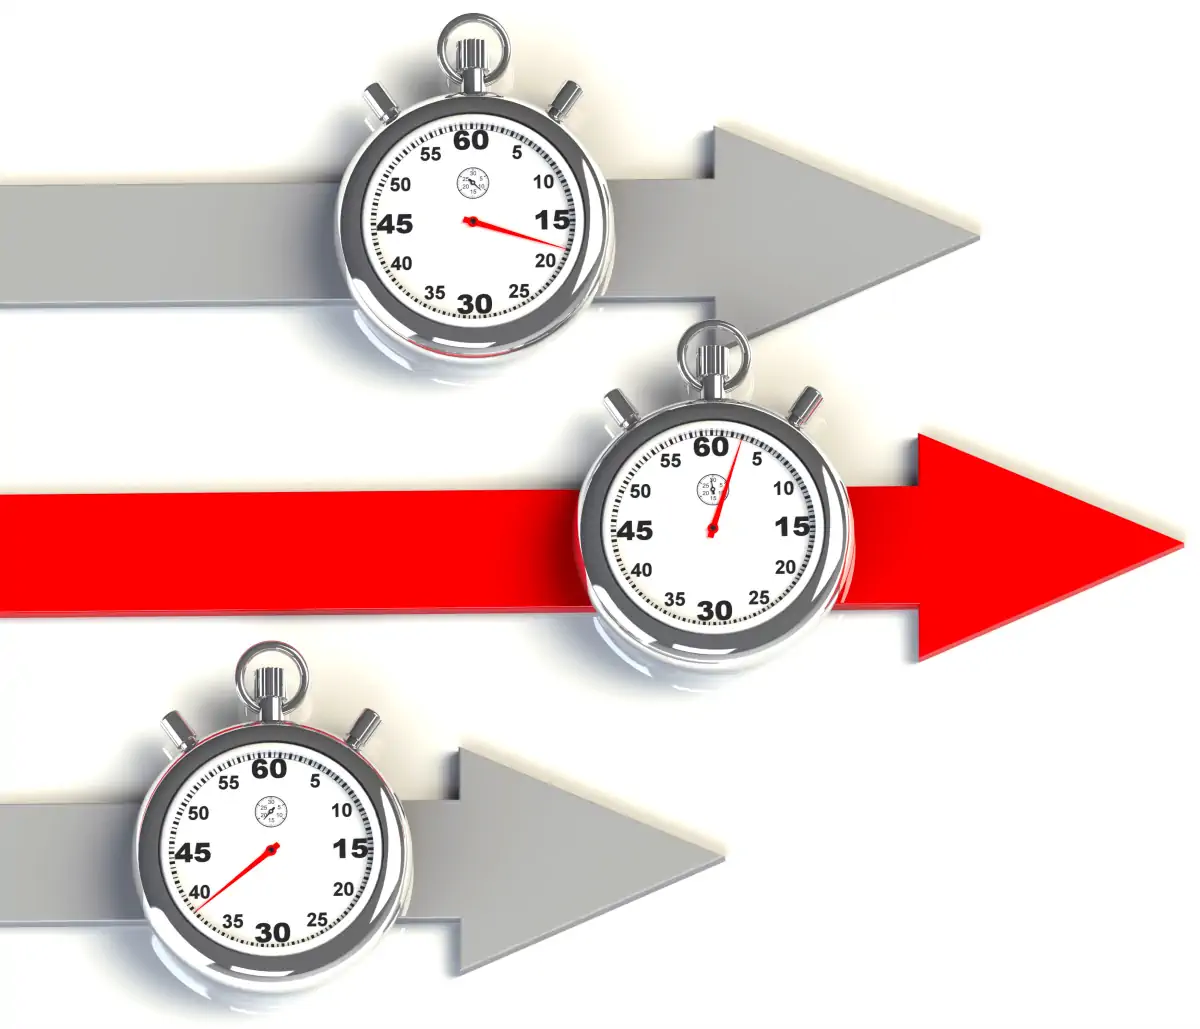 instant title loan funding time frames - three different timeframes based on level of preparation.